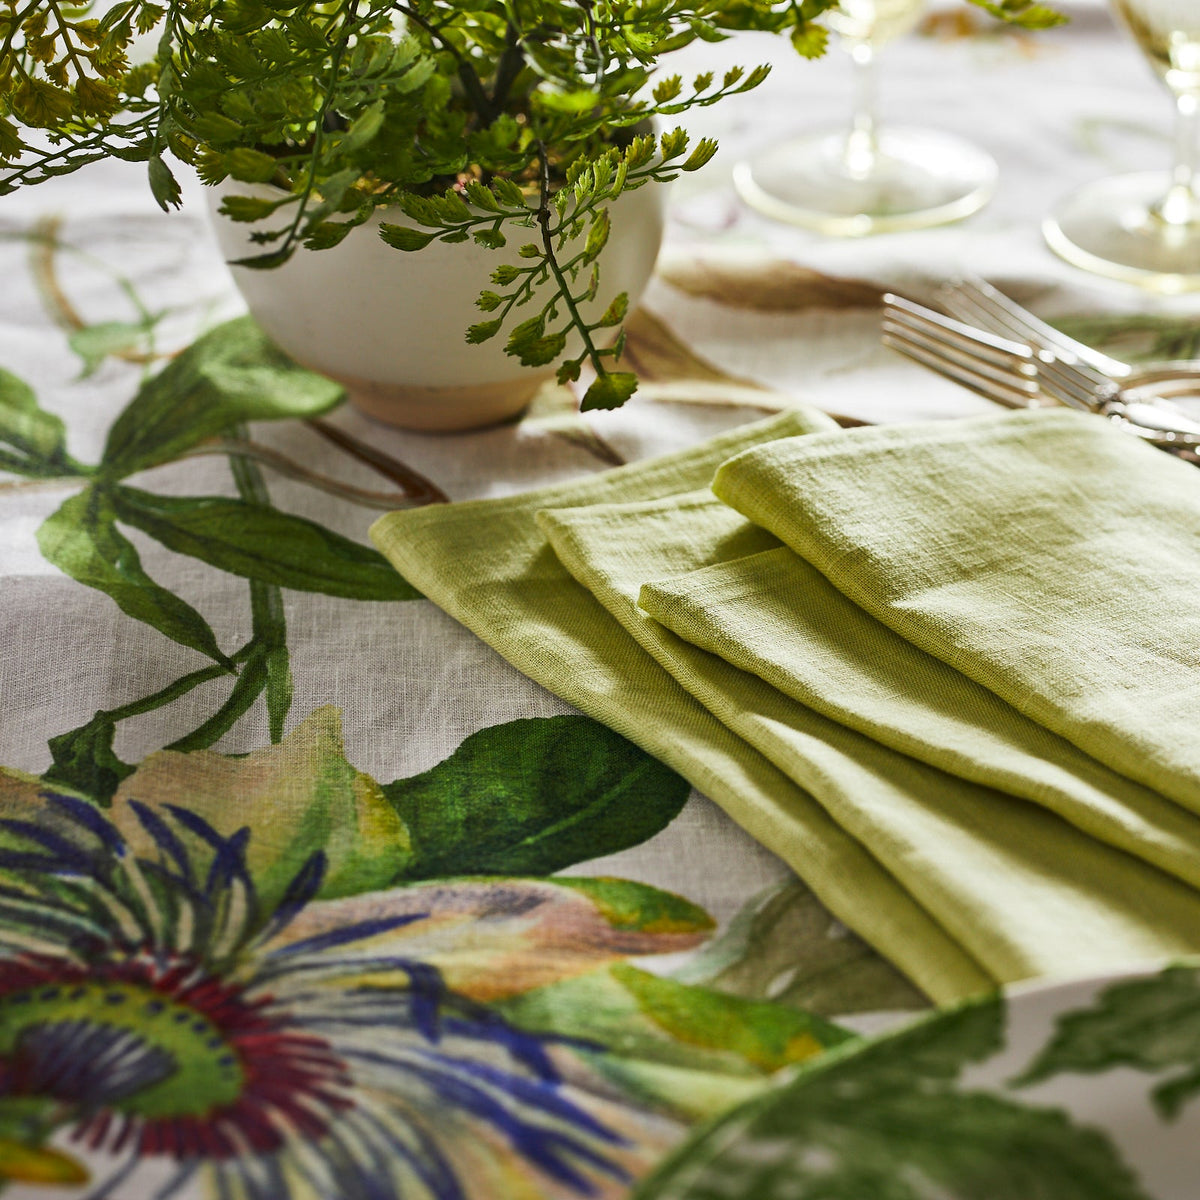 A set of Passionflower Linen Tablecloth napkins with passionflowers printed on them by TTT.